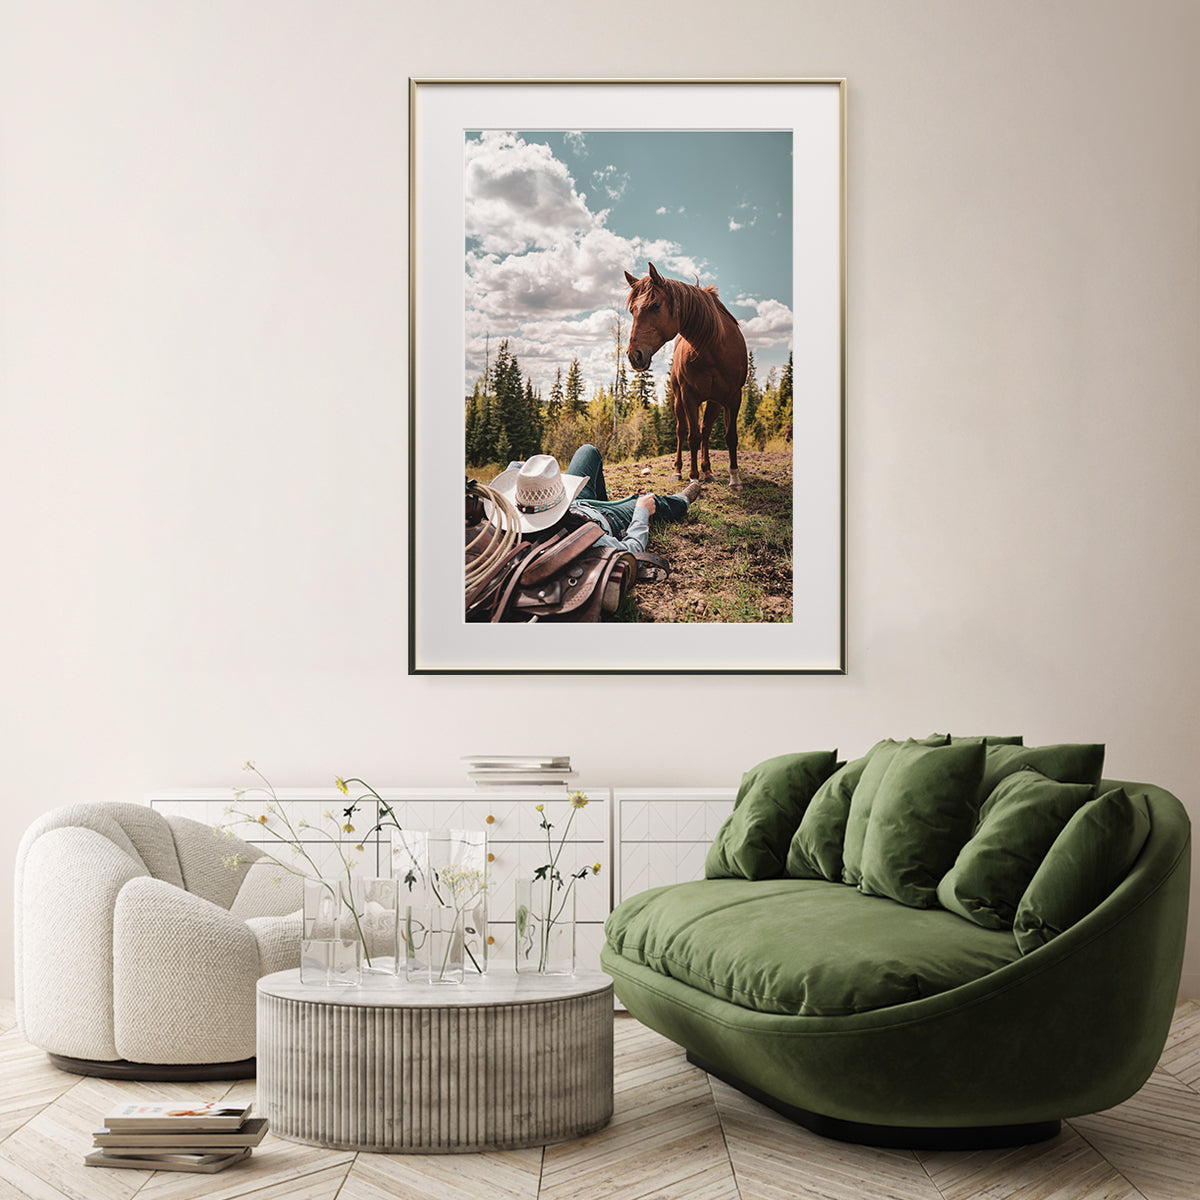 Cowboy With His Horse Posters For Home And Office Decor-Vertical Posters NOT FRAMED-CetArt-8″x10″ inches-CetArt